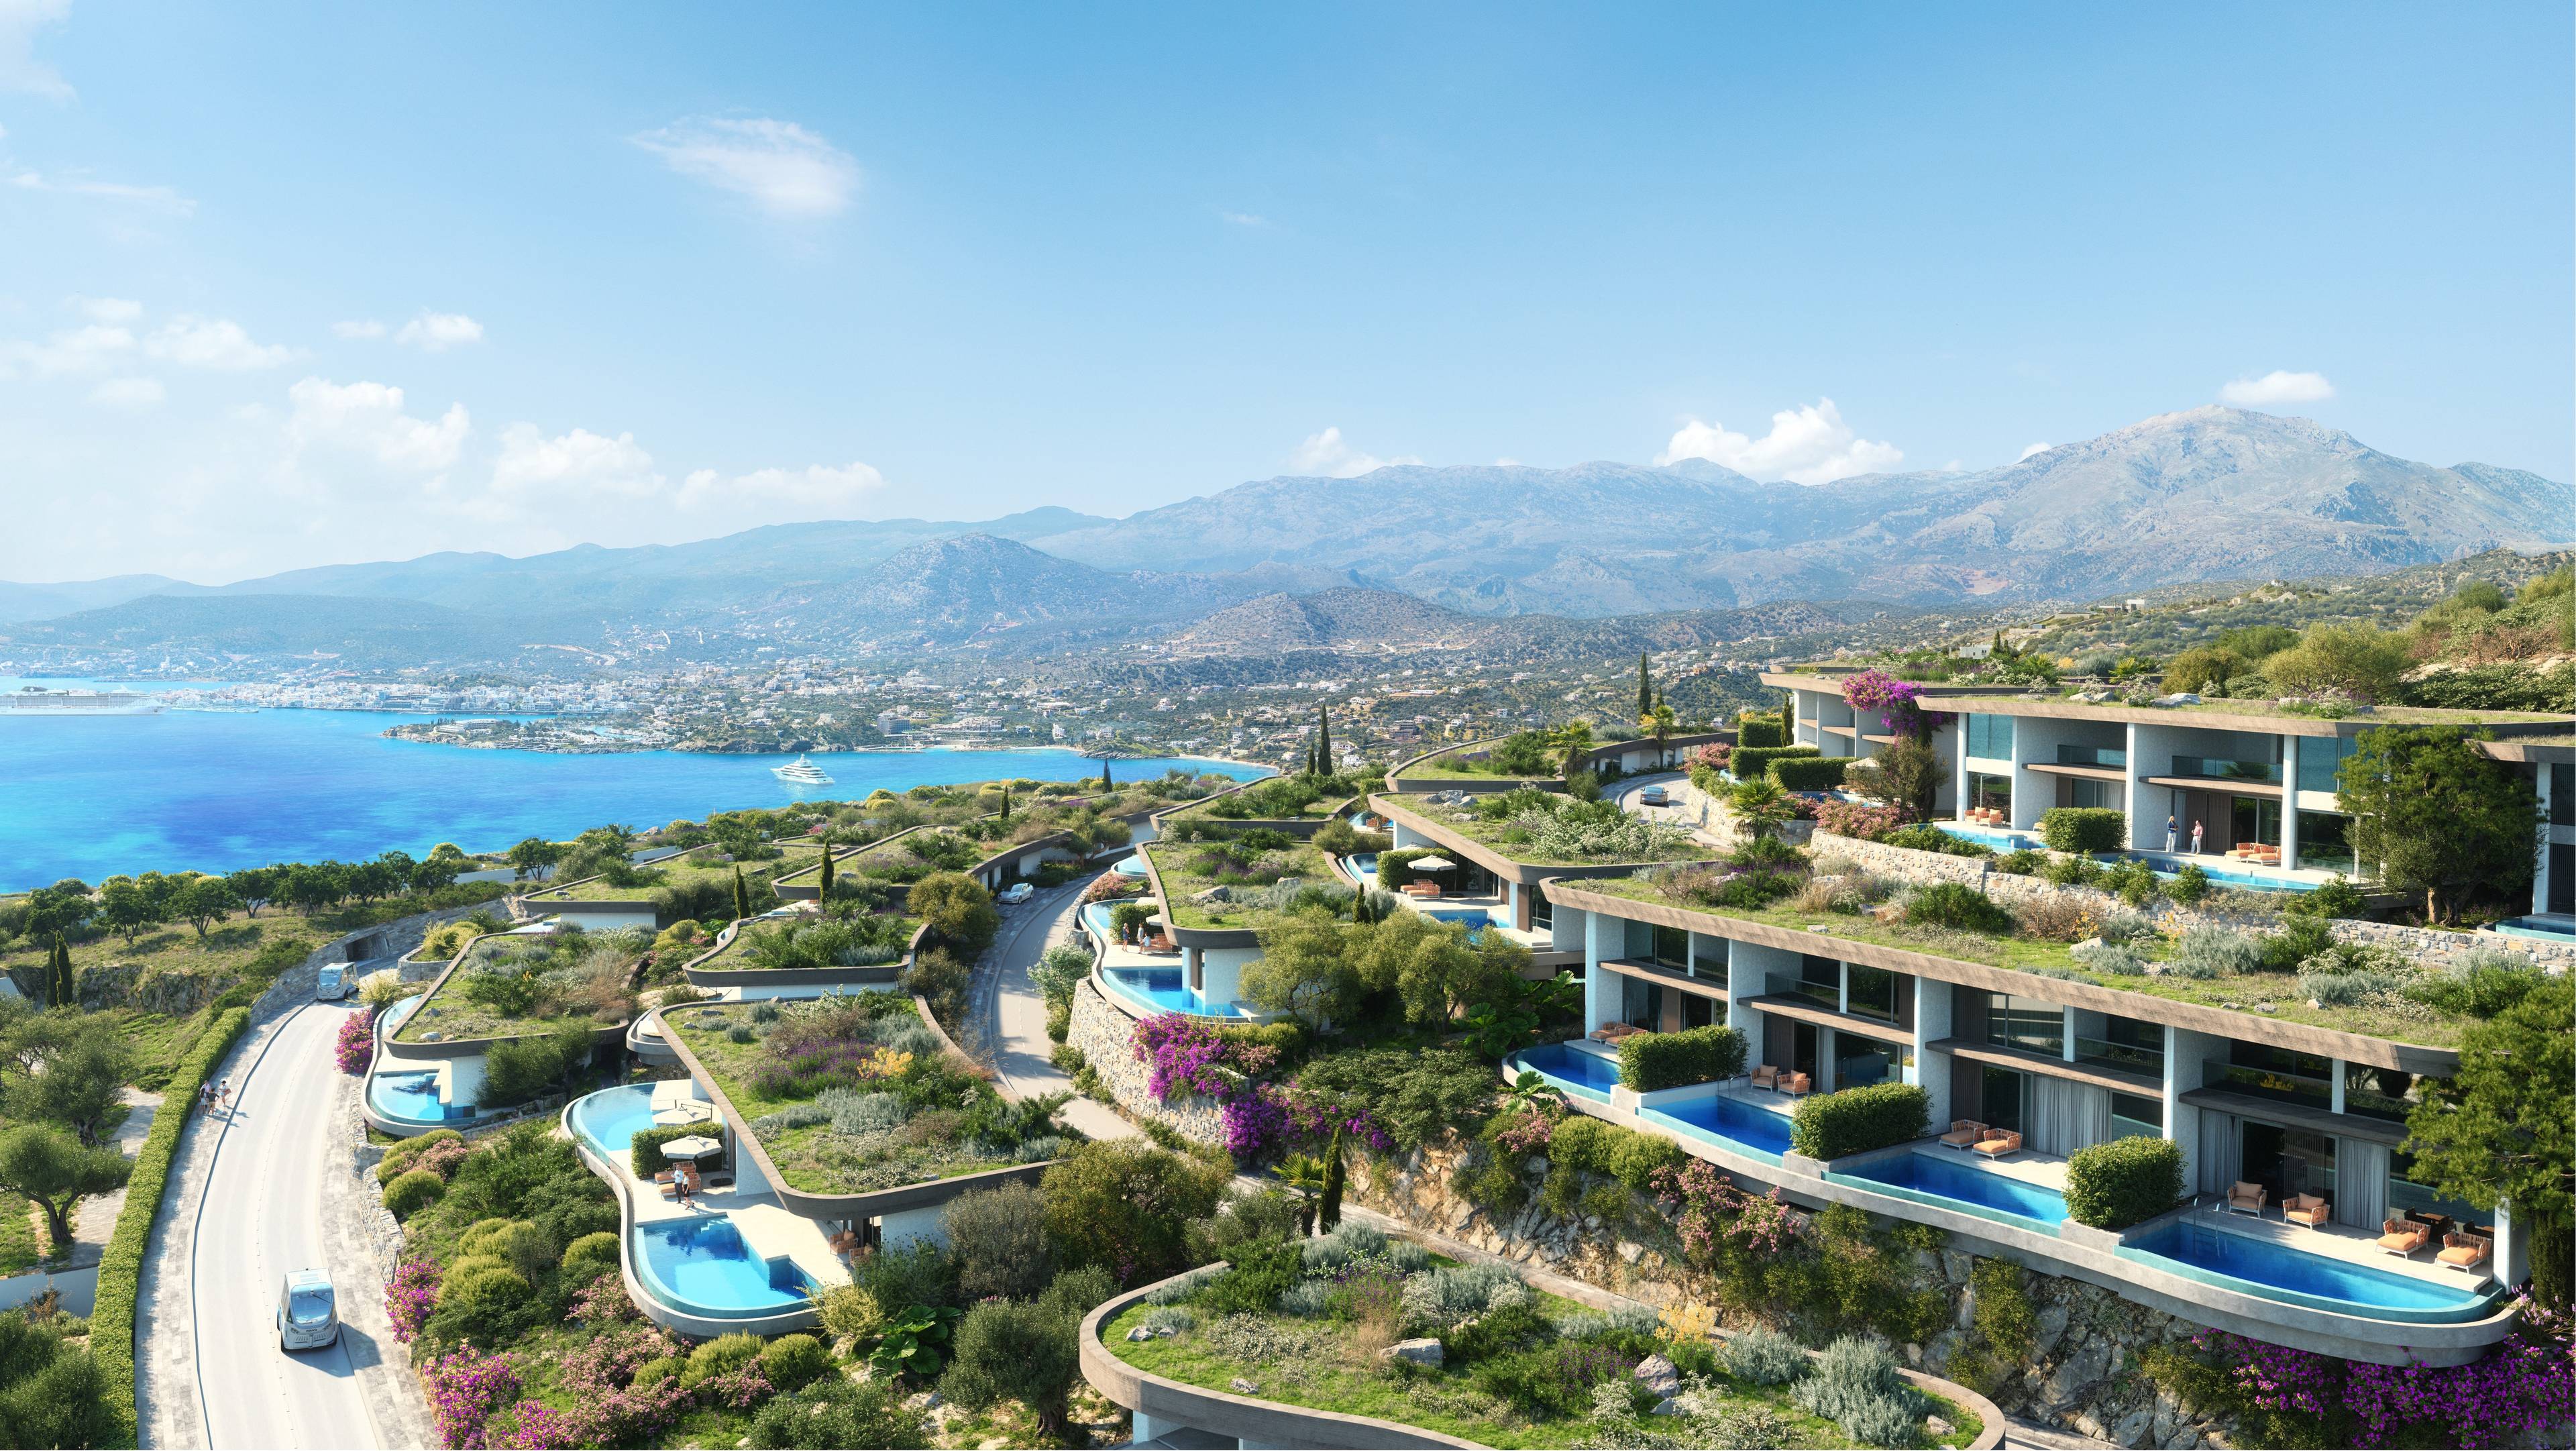 Luxury 2-Bedroom Seafront Apartment in a Sustainable Private Resort in the Heart of Crete with Swimming Pool, Terrace and Full Sea Views